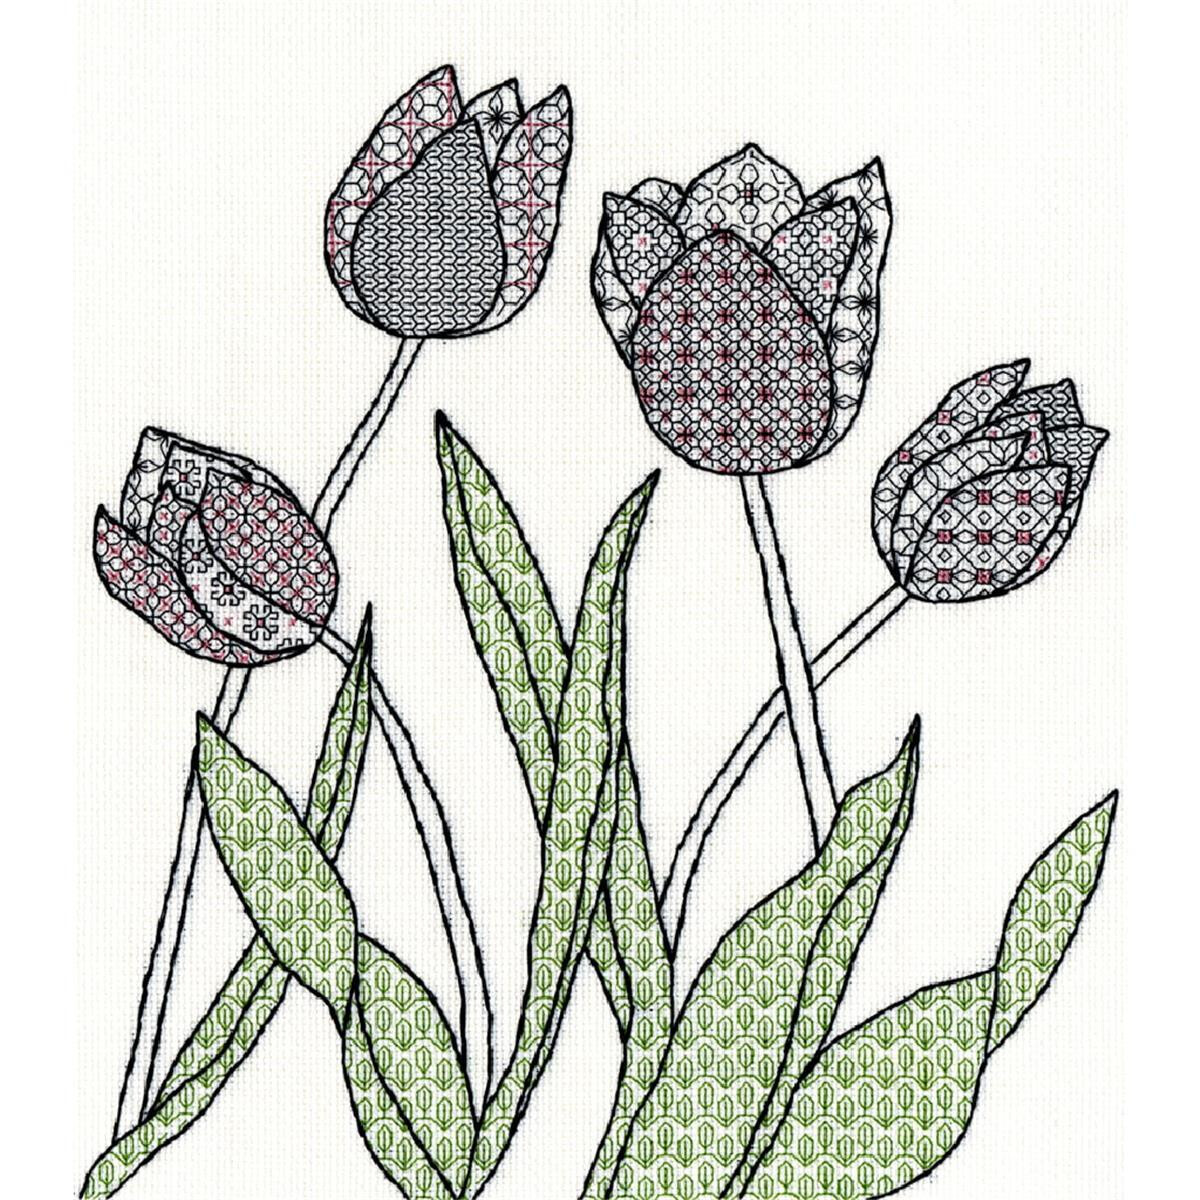 An embroidery design, embroidery pack from Bothy Threads,...